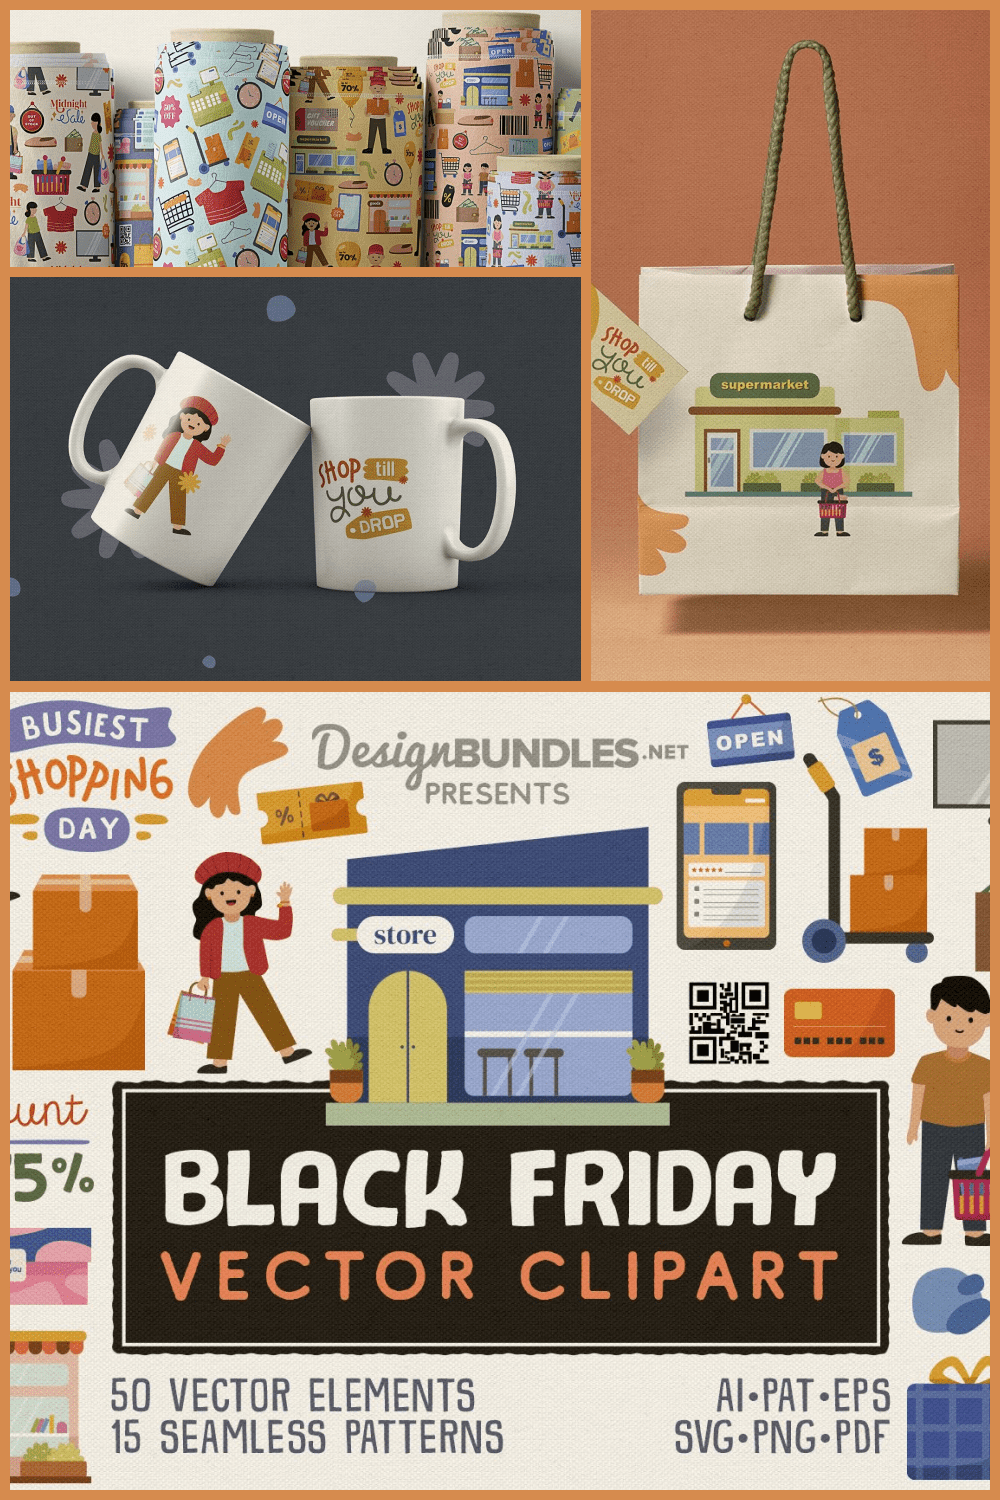 Mix of clipart with customers, shops, goods, on a mug, bag and wrapping paper.